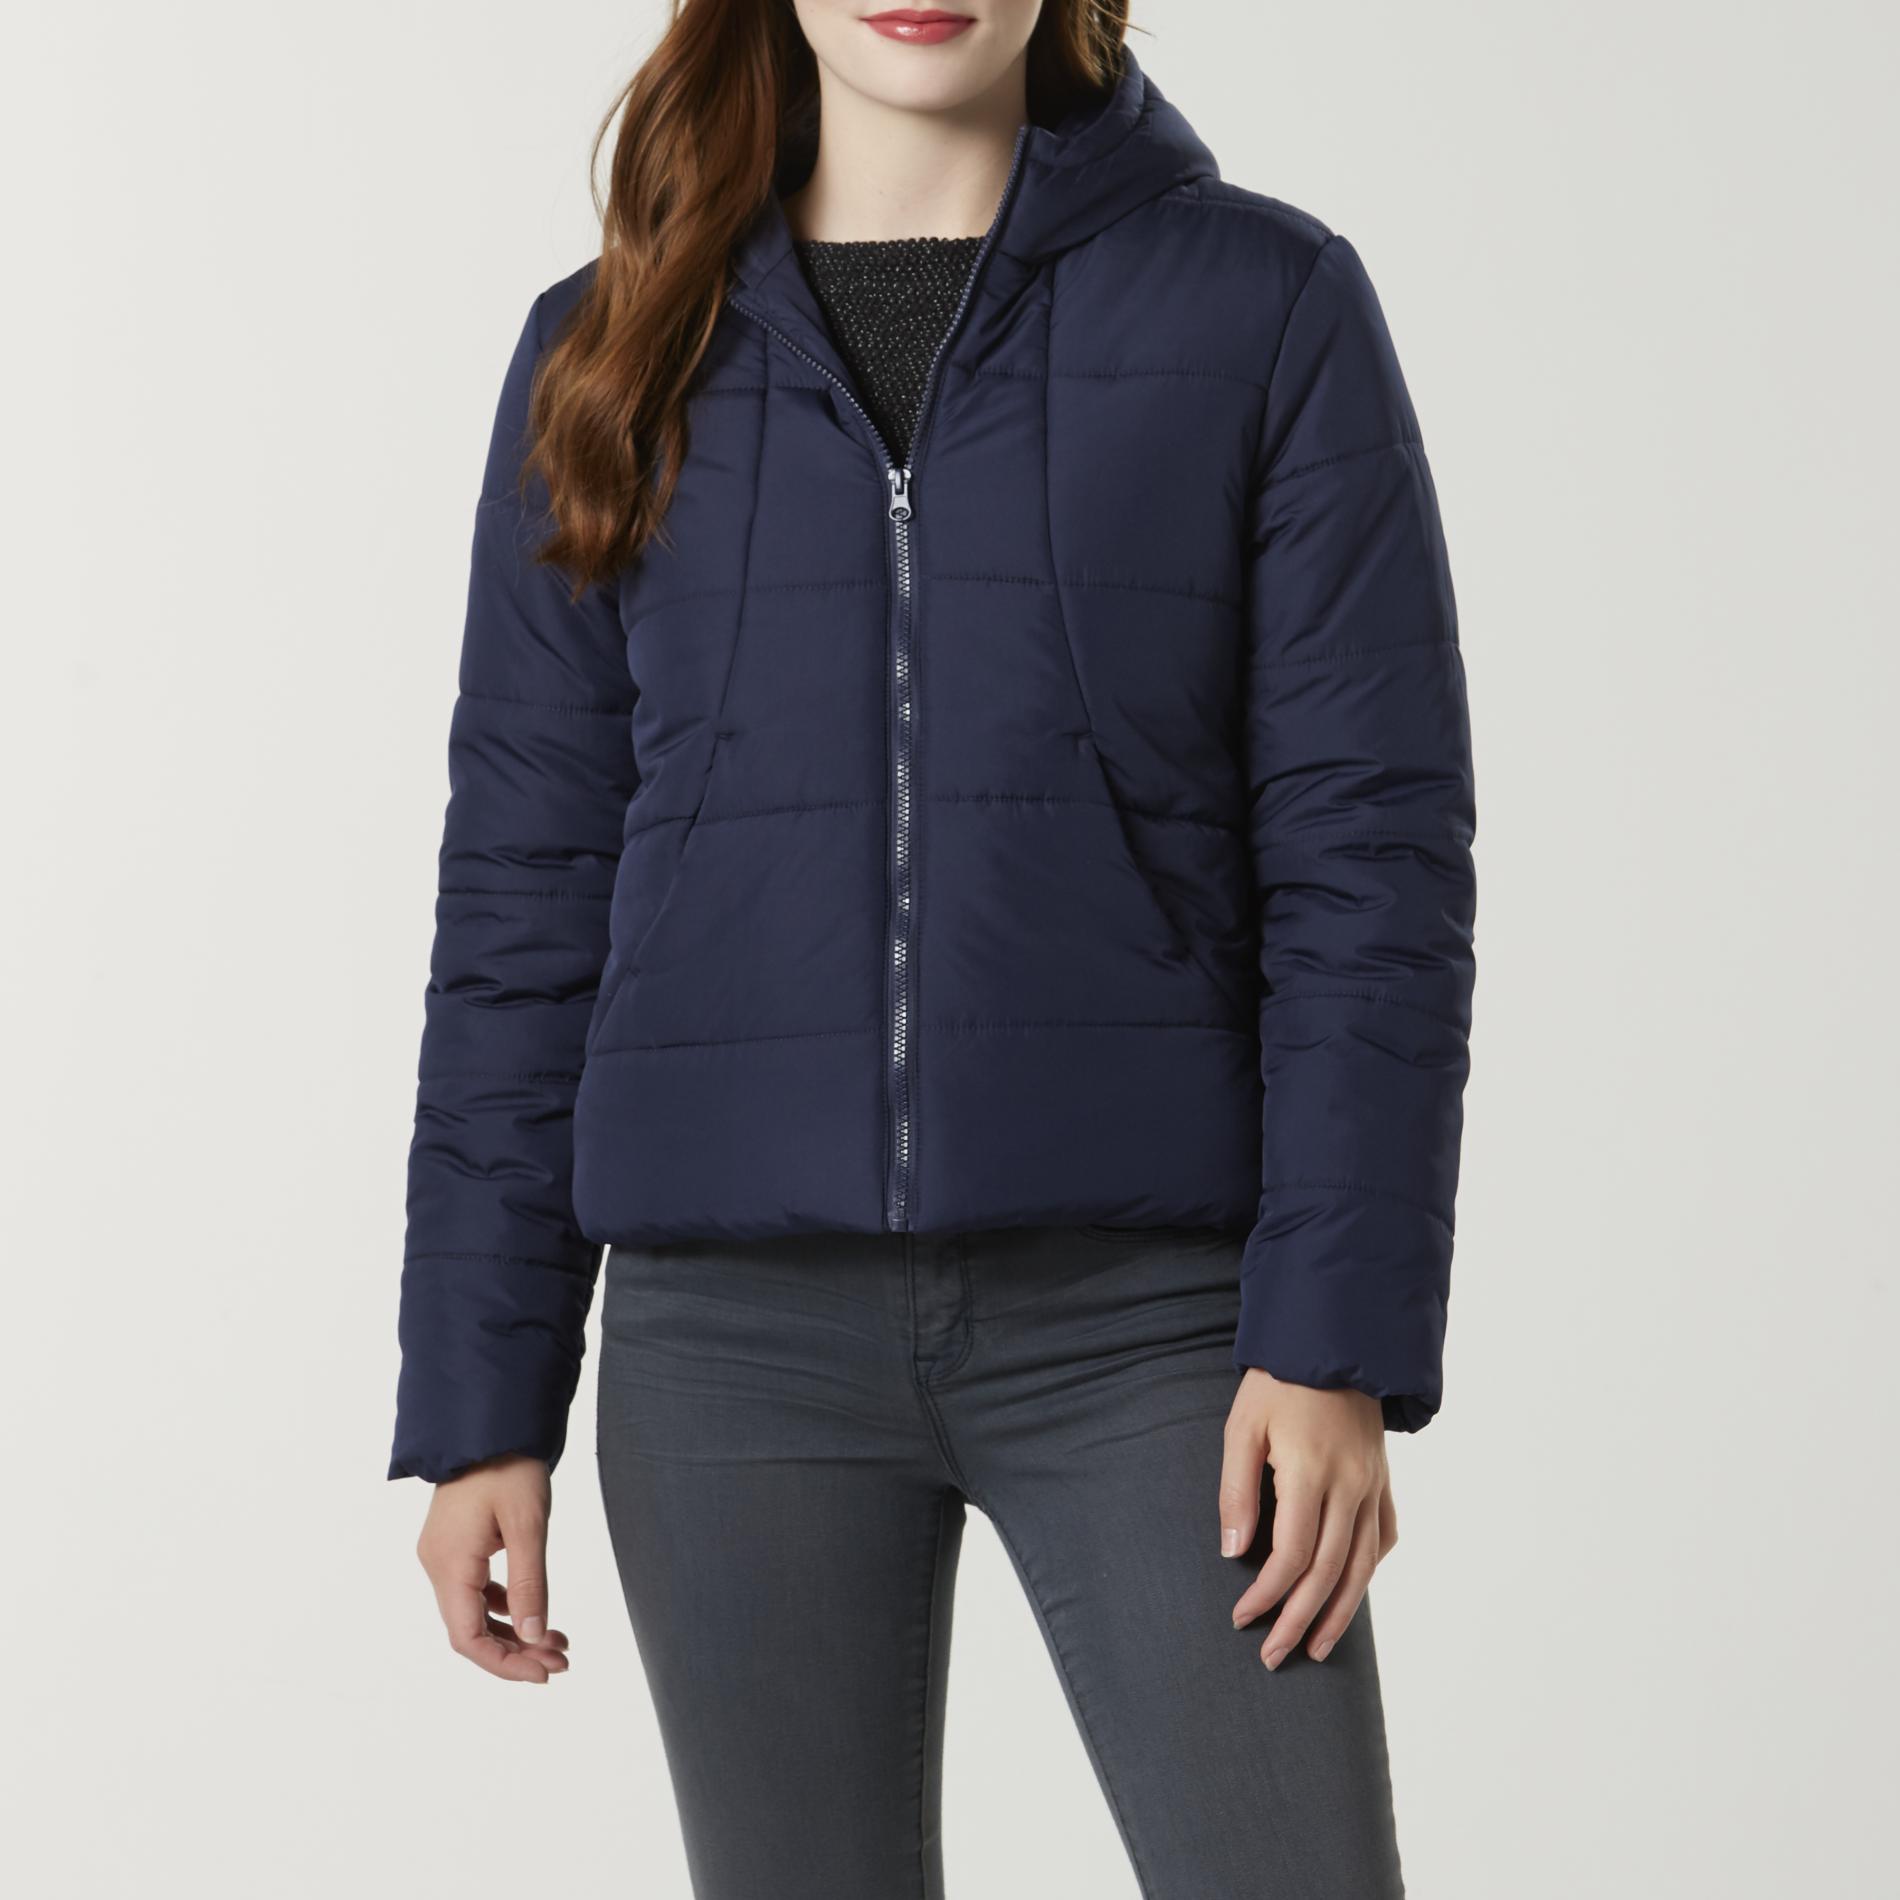 Me Jane Women's Hooded Puffer Jacket | Shop Your Way: Online Shopping ...